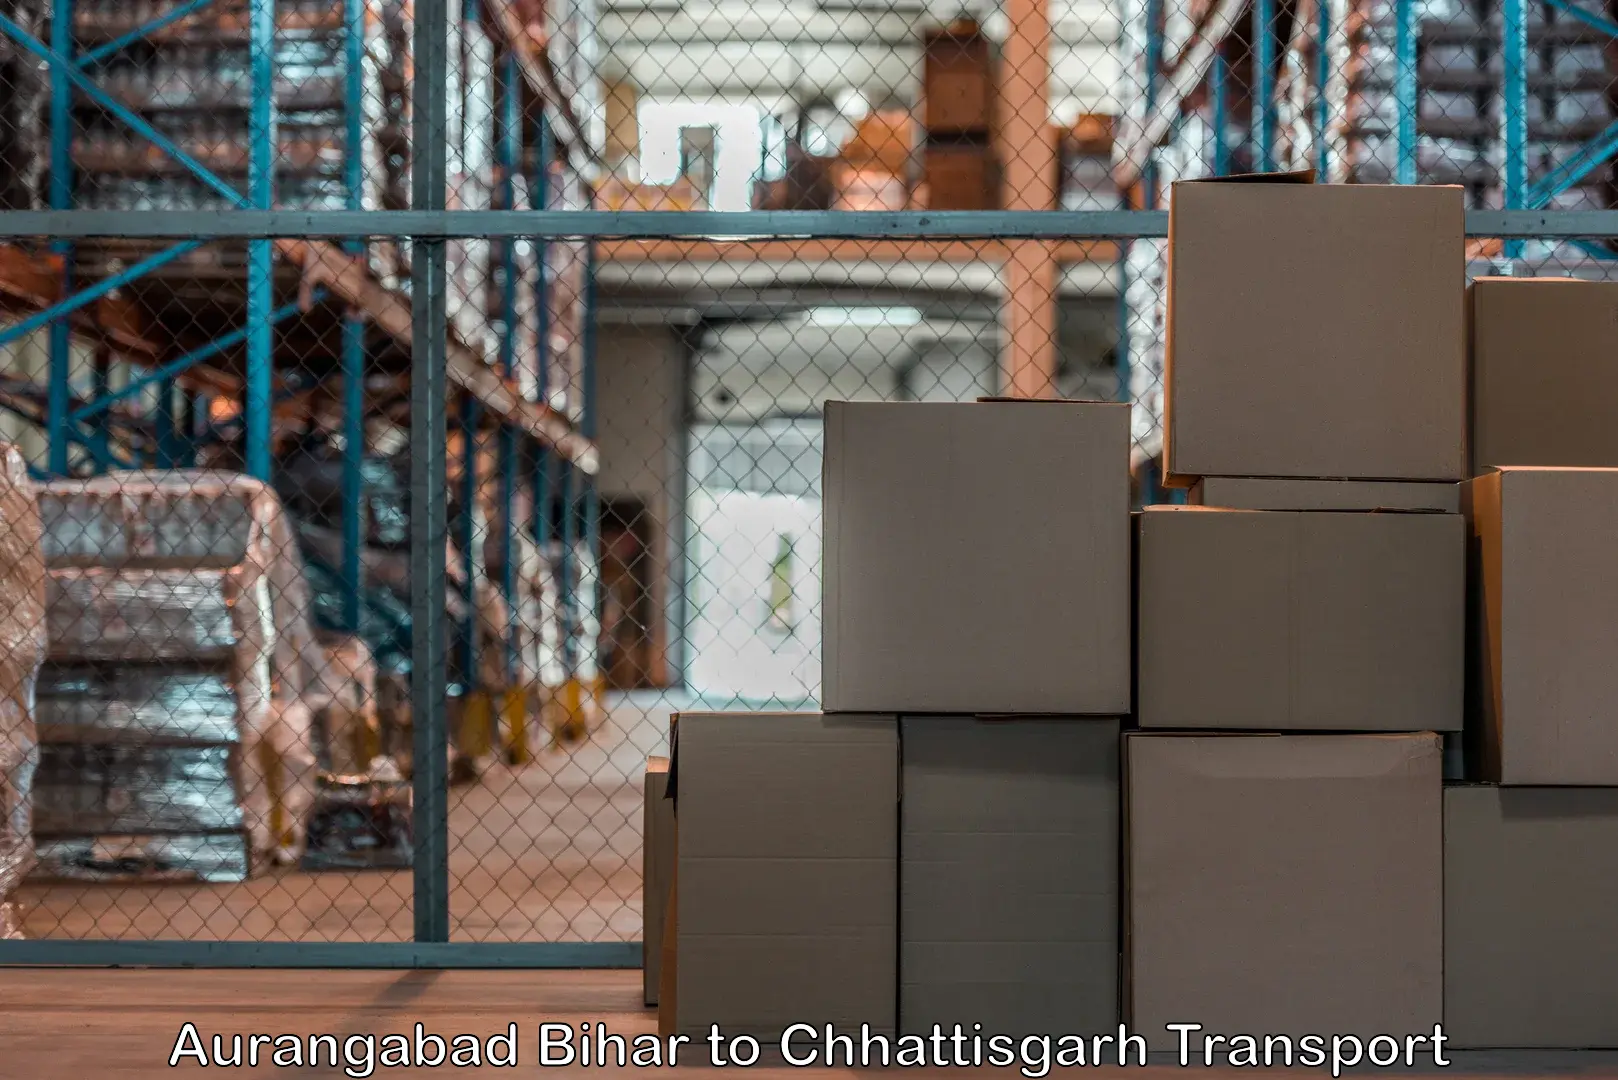 Shipping services in Aurangabad Bihar to Pendra